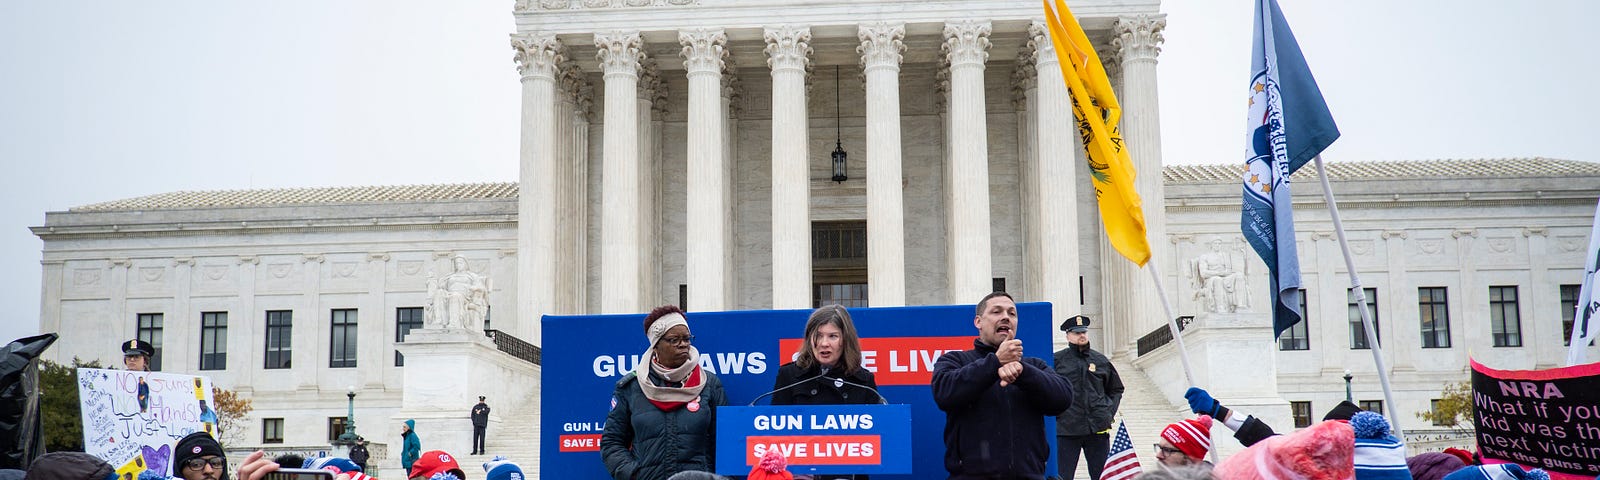 A crowd gathers in front of the Supreme Court for a rally. Signs and banners say, “gun laws save lives”